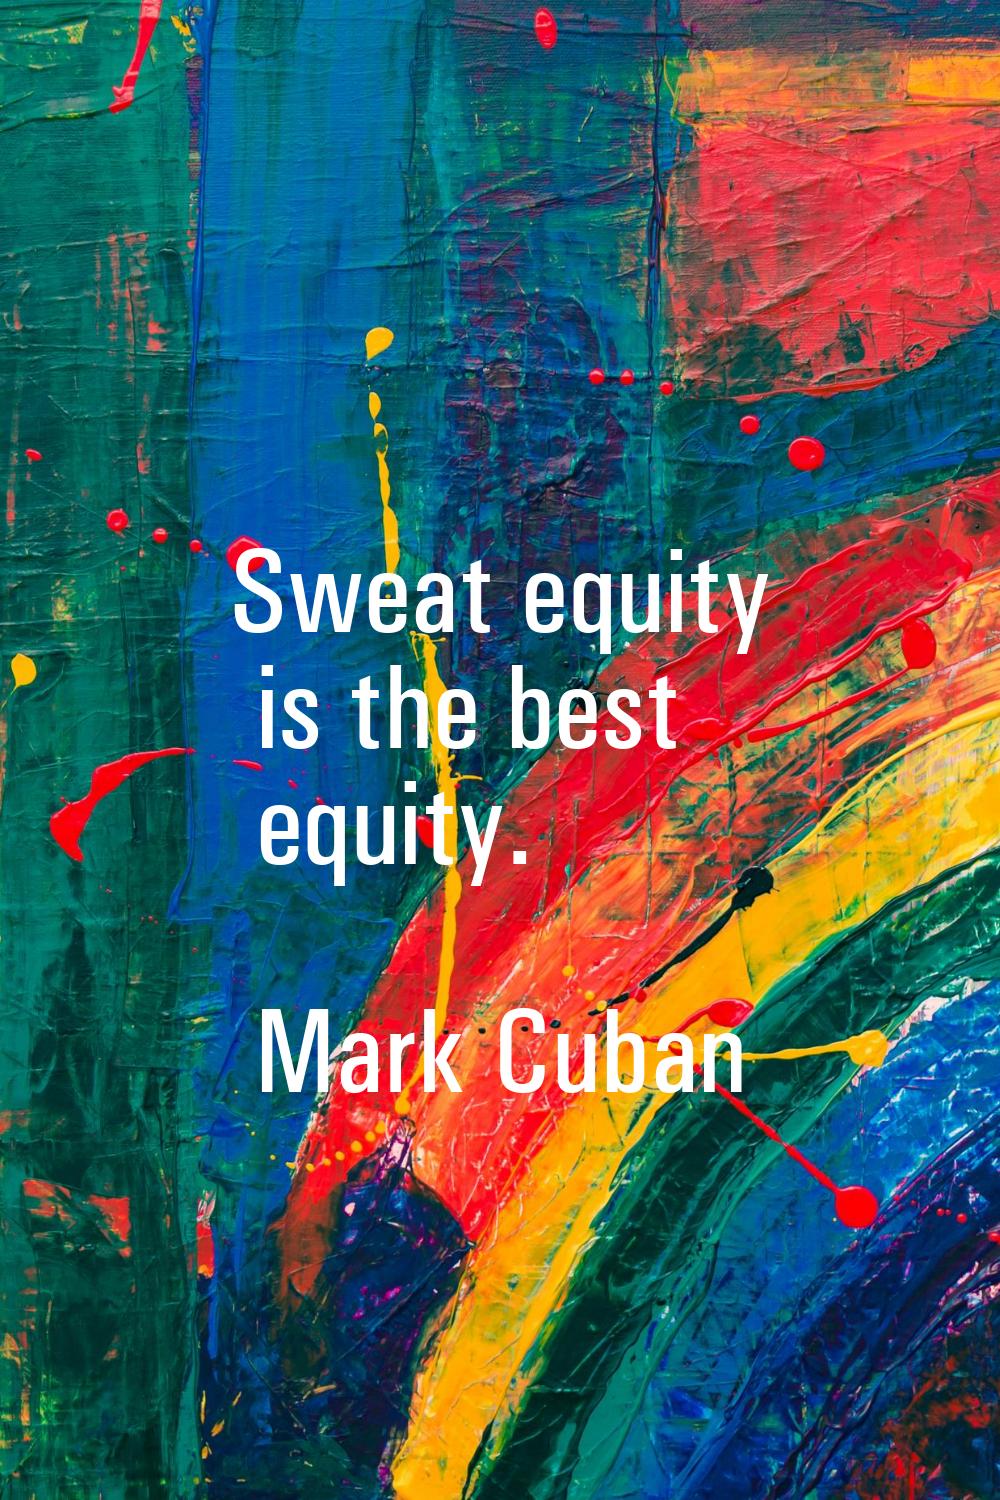 Sweat equity is the best equity.